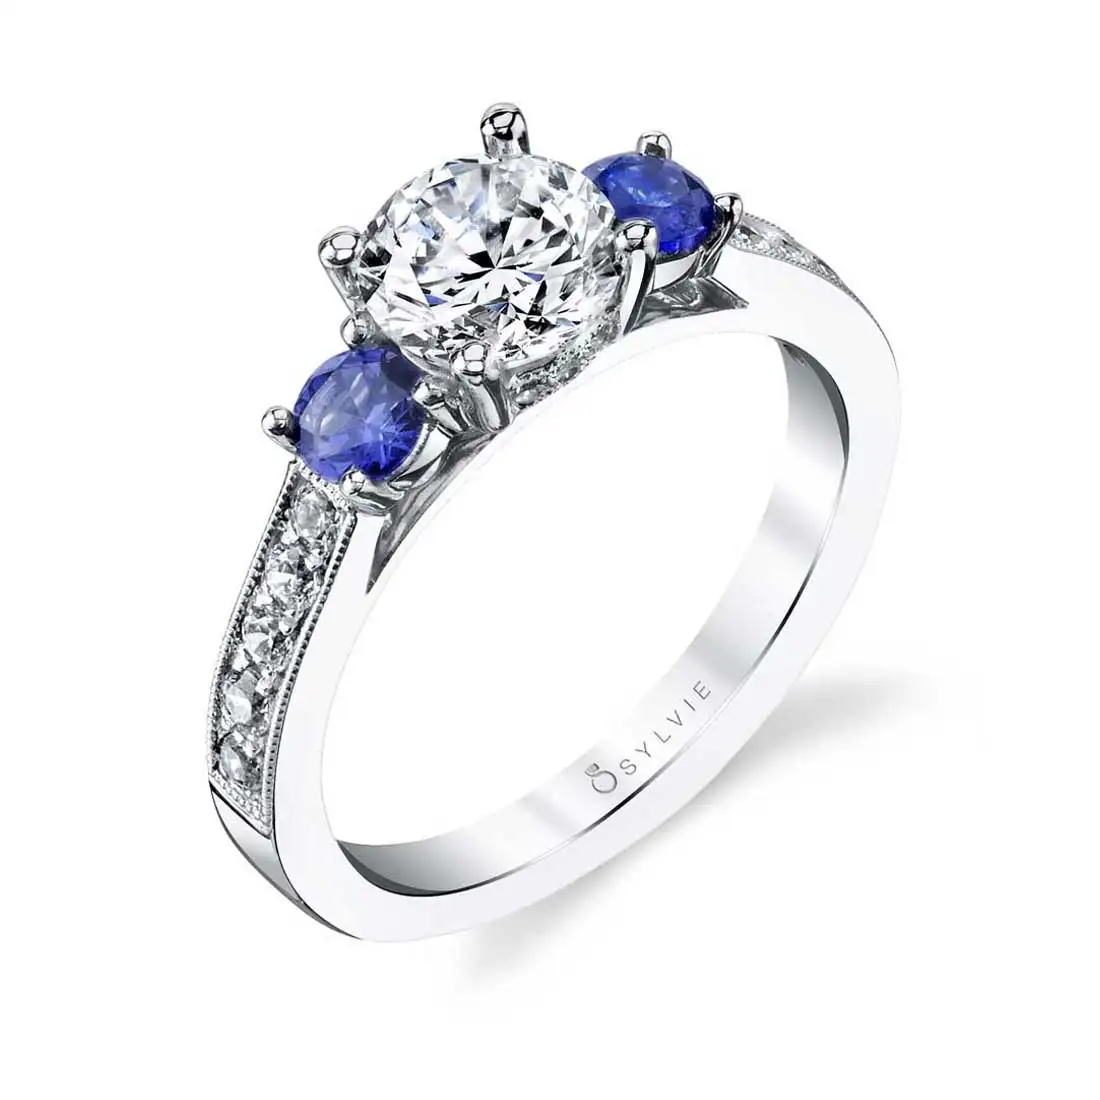 The Hues of the Sapphire Engagement Ring | Frank Darling